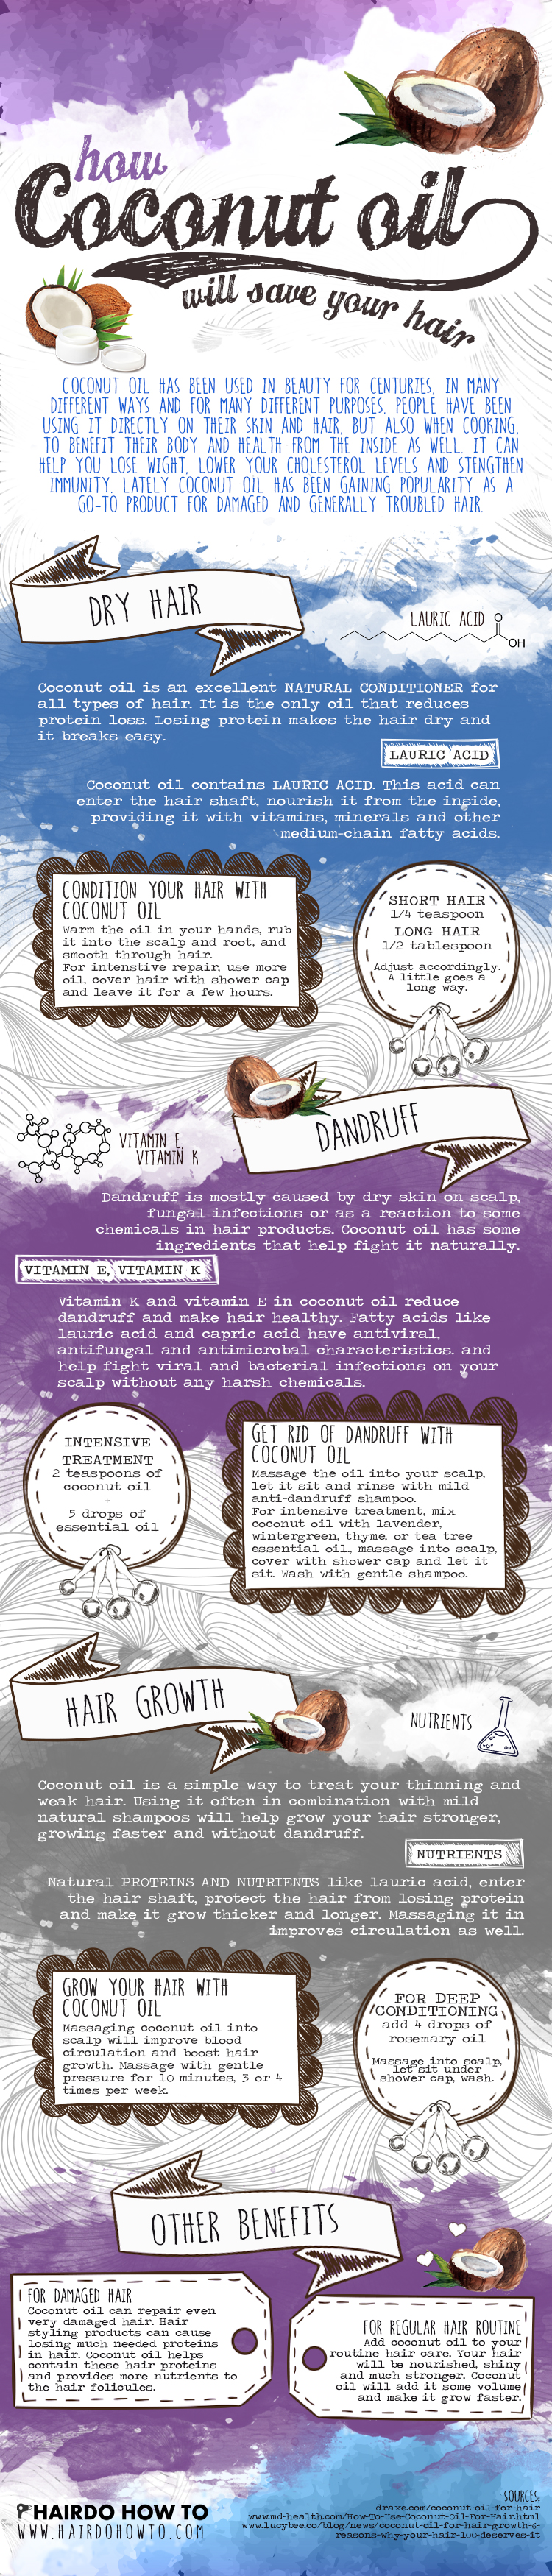 Benefits Of Coconut Oil Infographic